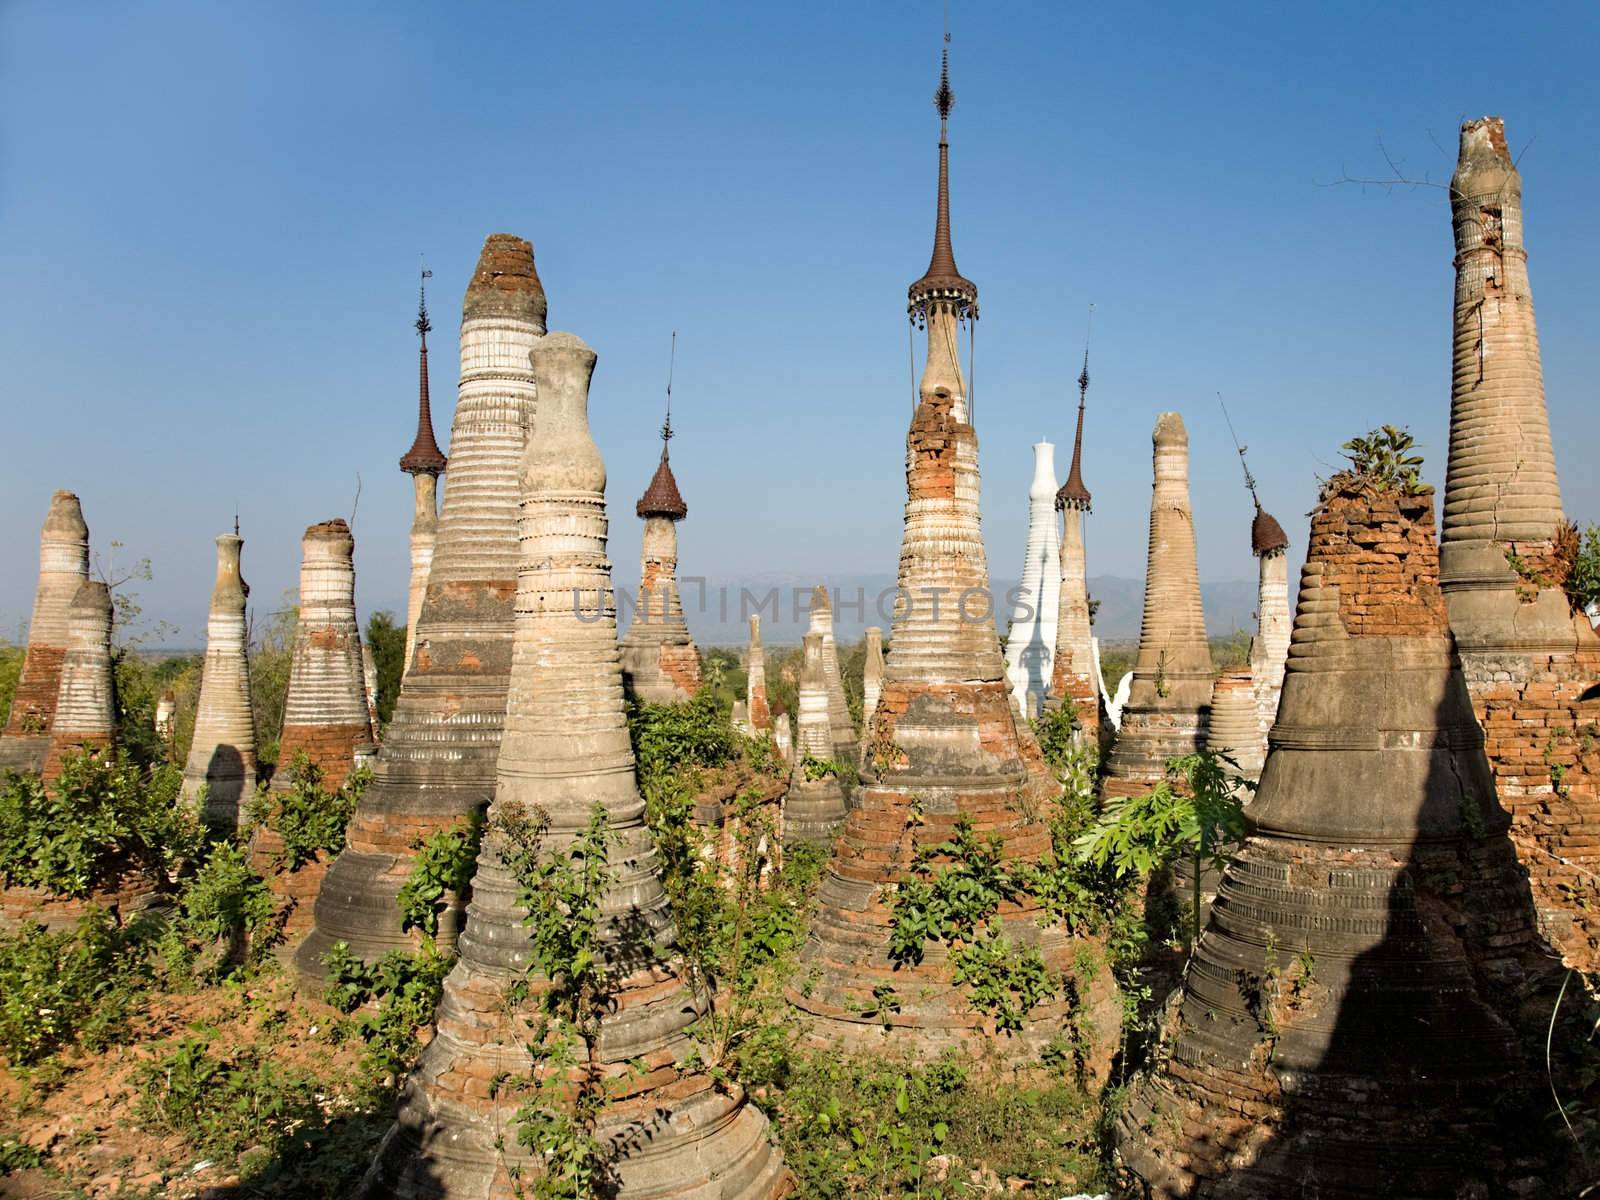  Shwe Inn Thein Paya, Indein, (Nyaungshwe),  Inle Lake,Shan state, myanmar (Burma). Weather-beaten buddhistic zedi constructed in 17th and 18th century damaged by earthquake in 1975, partitialy back reconstructed.